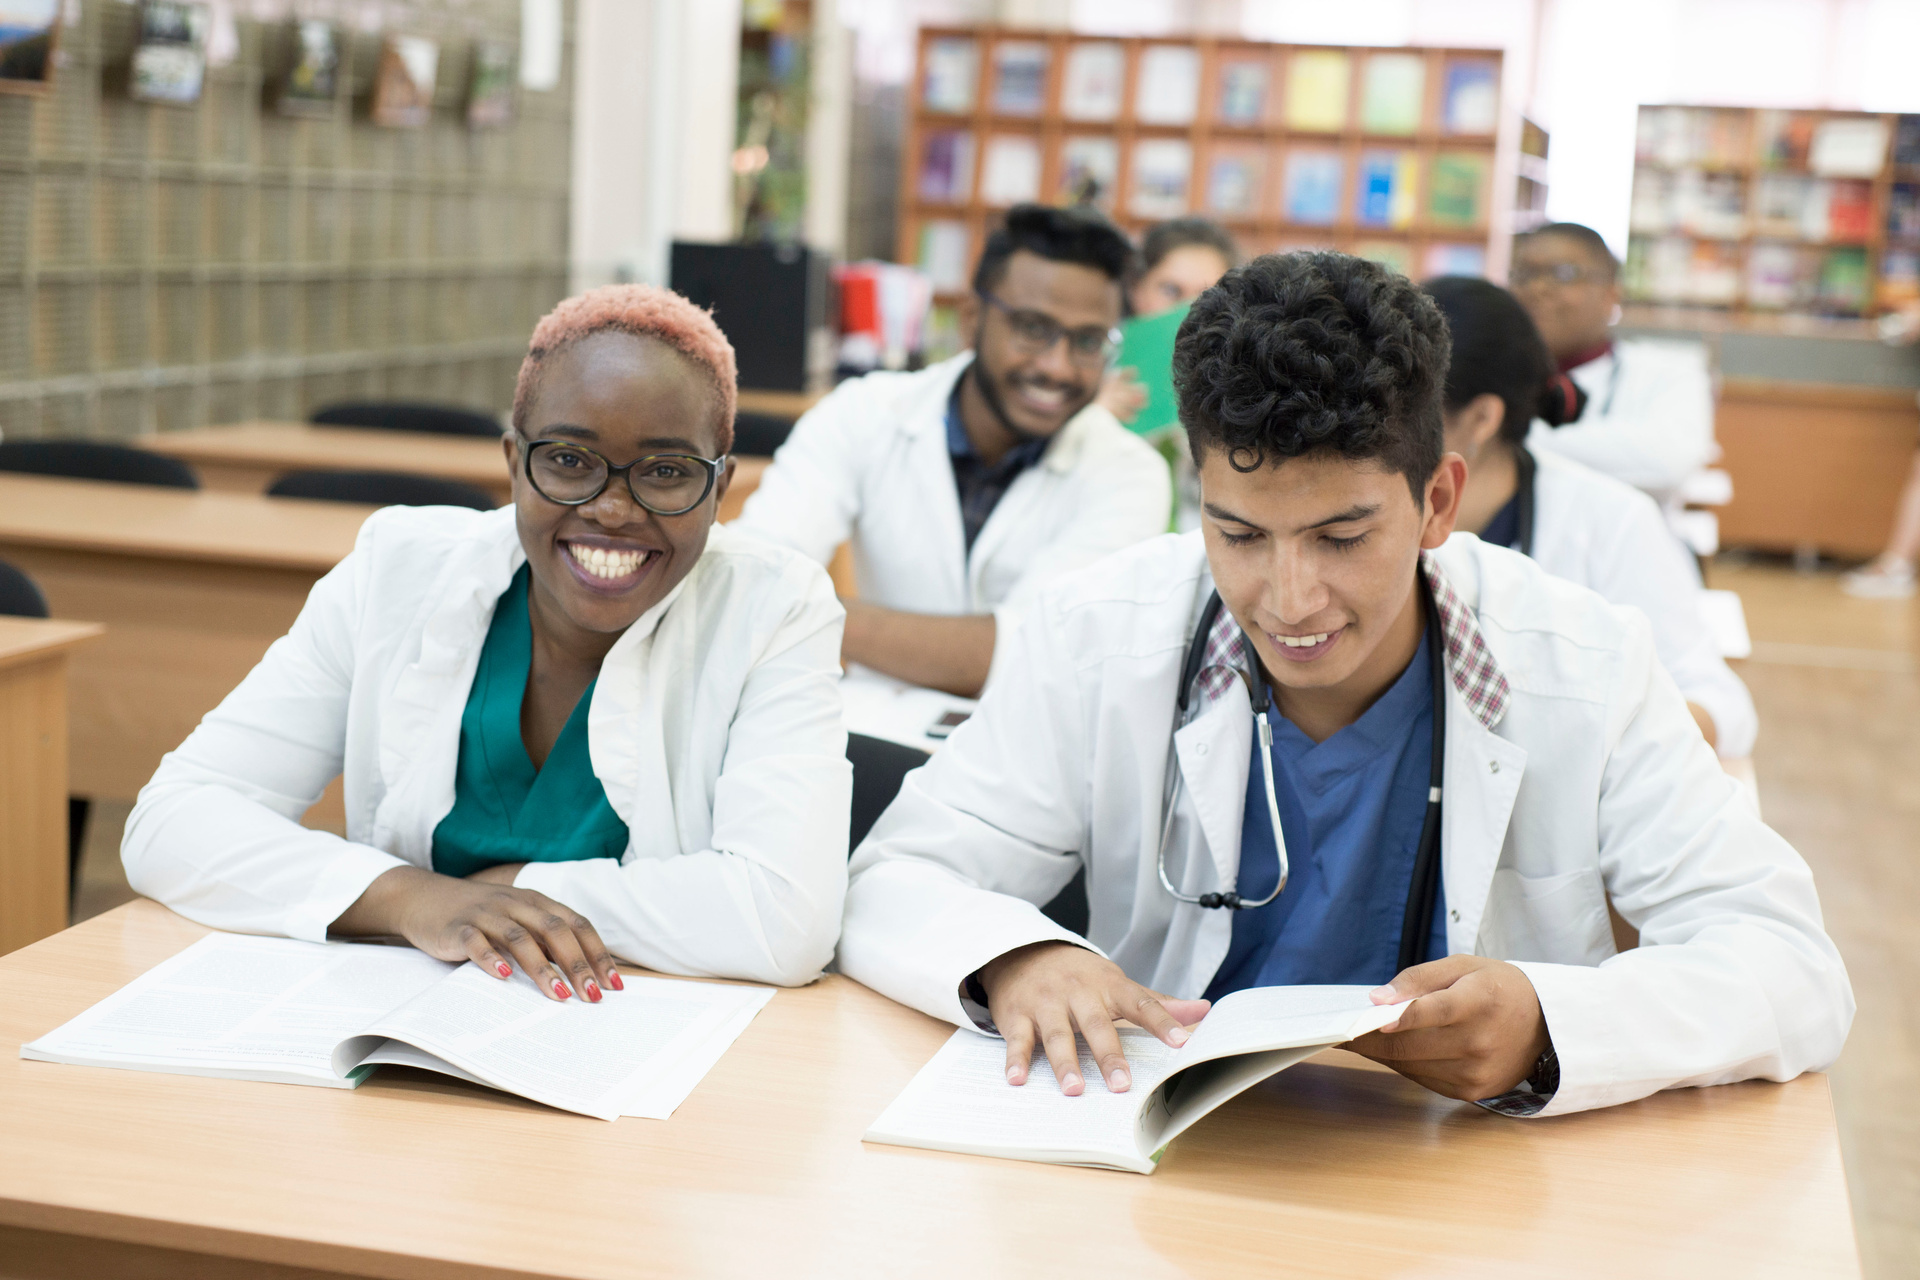 Medical students in a classroom setting